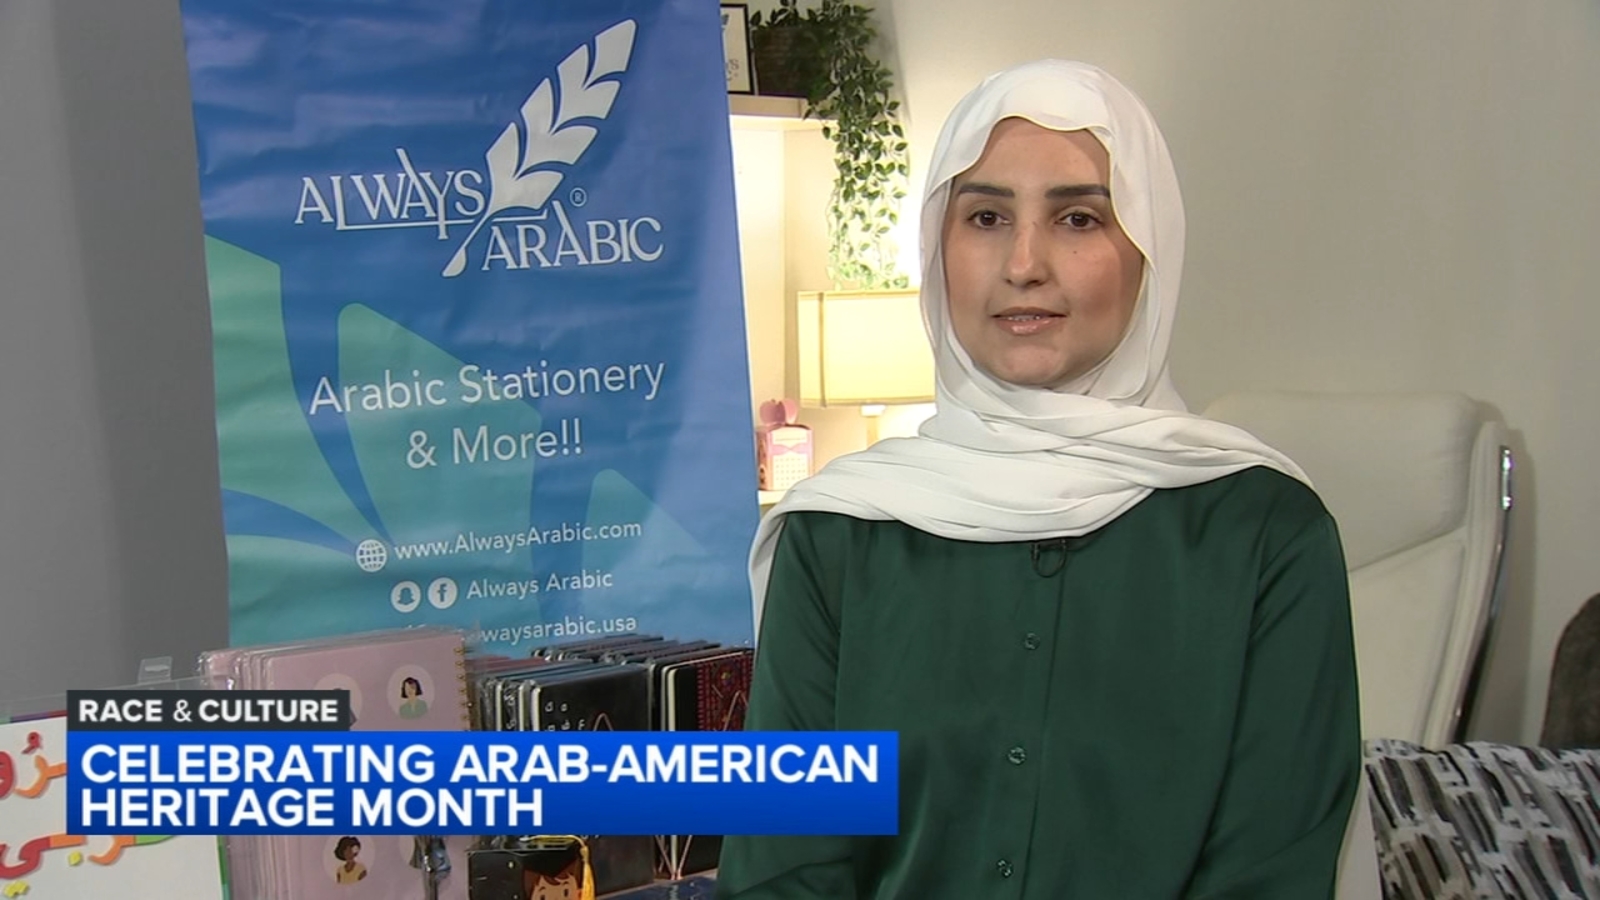 Chicago Arab American woman’s craft business Always Arabic bridges culture gaps with Arabic products for home and school [Video]